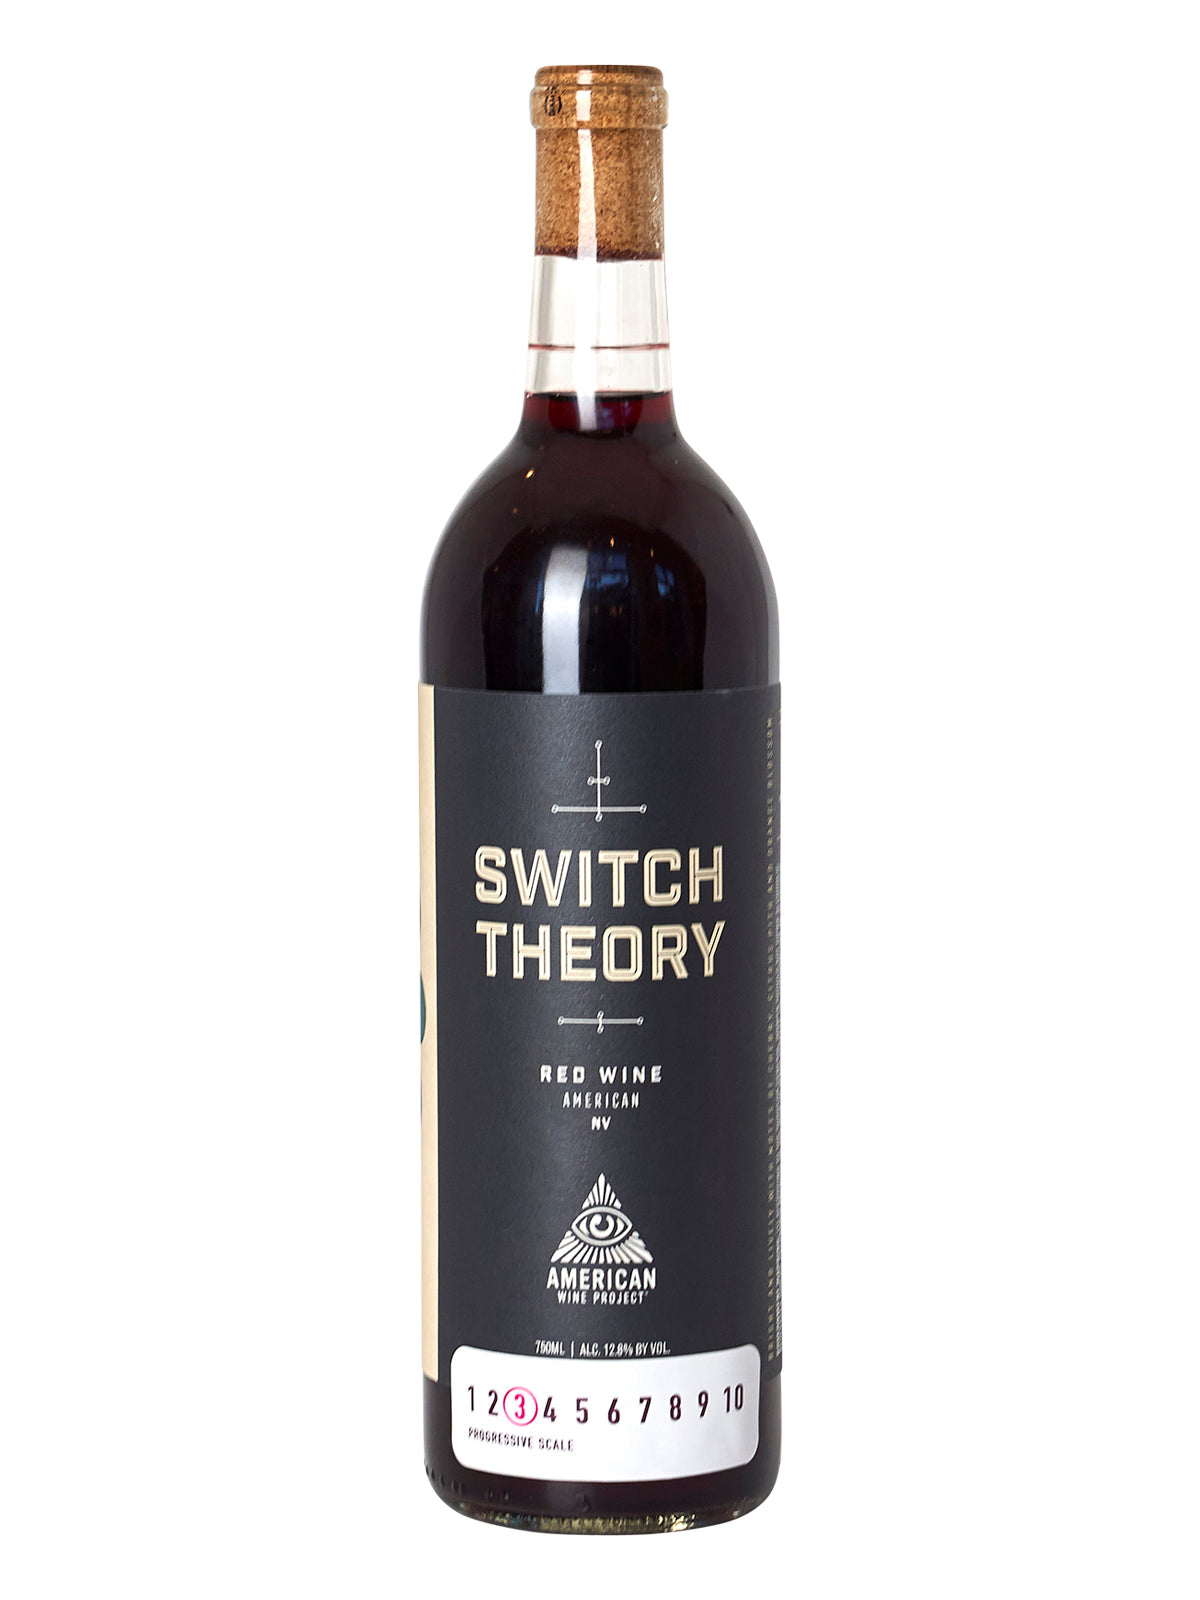 *3R* NV American Wine Project "Switch Theory" (Madison, WI)